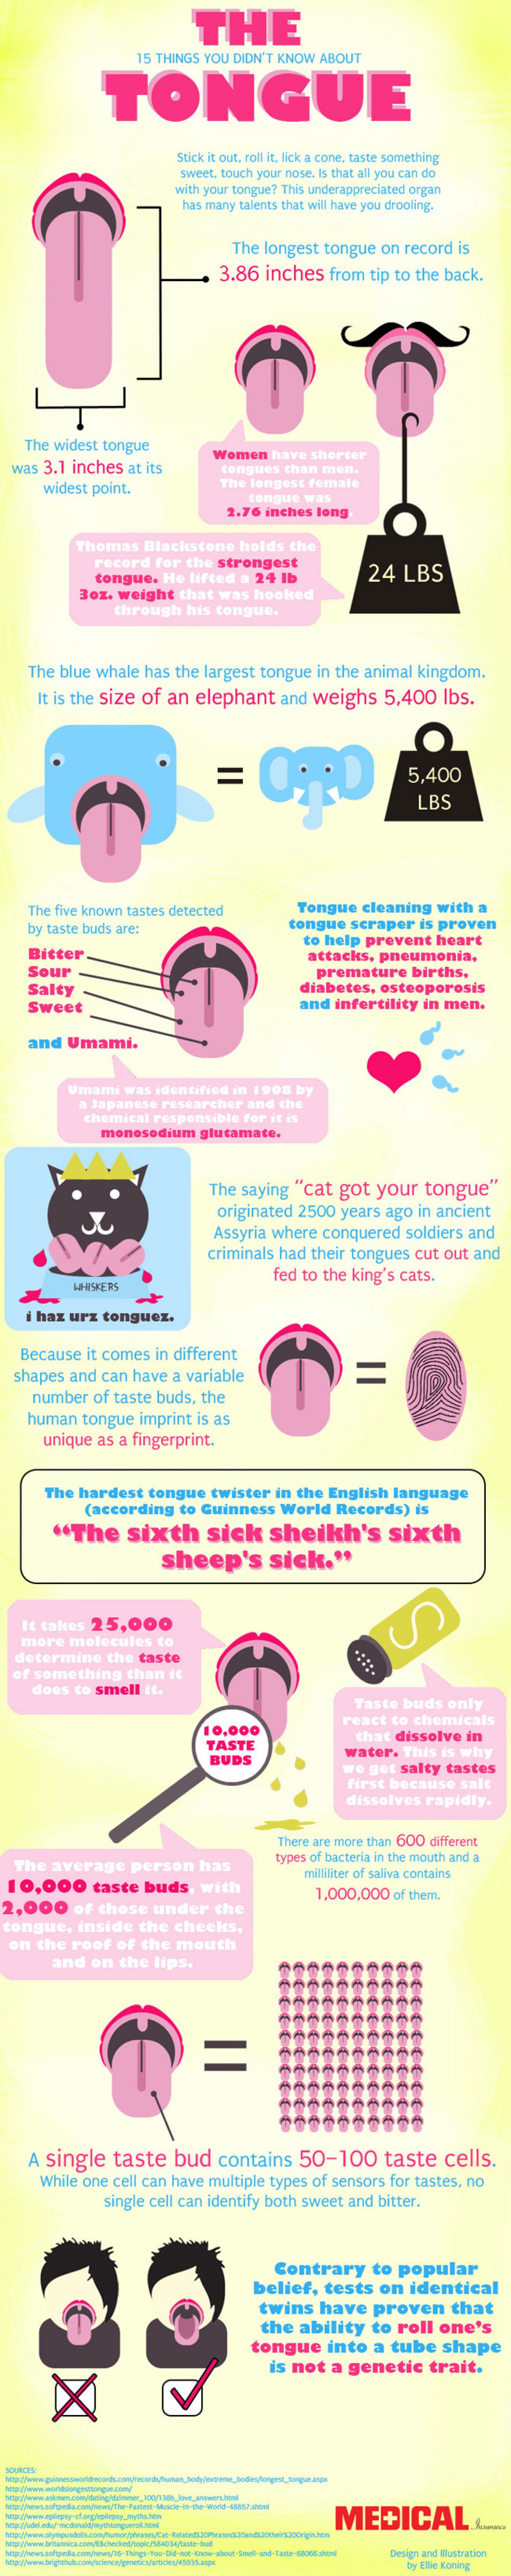 15 Things You Didn’t Know About The Tongue